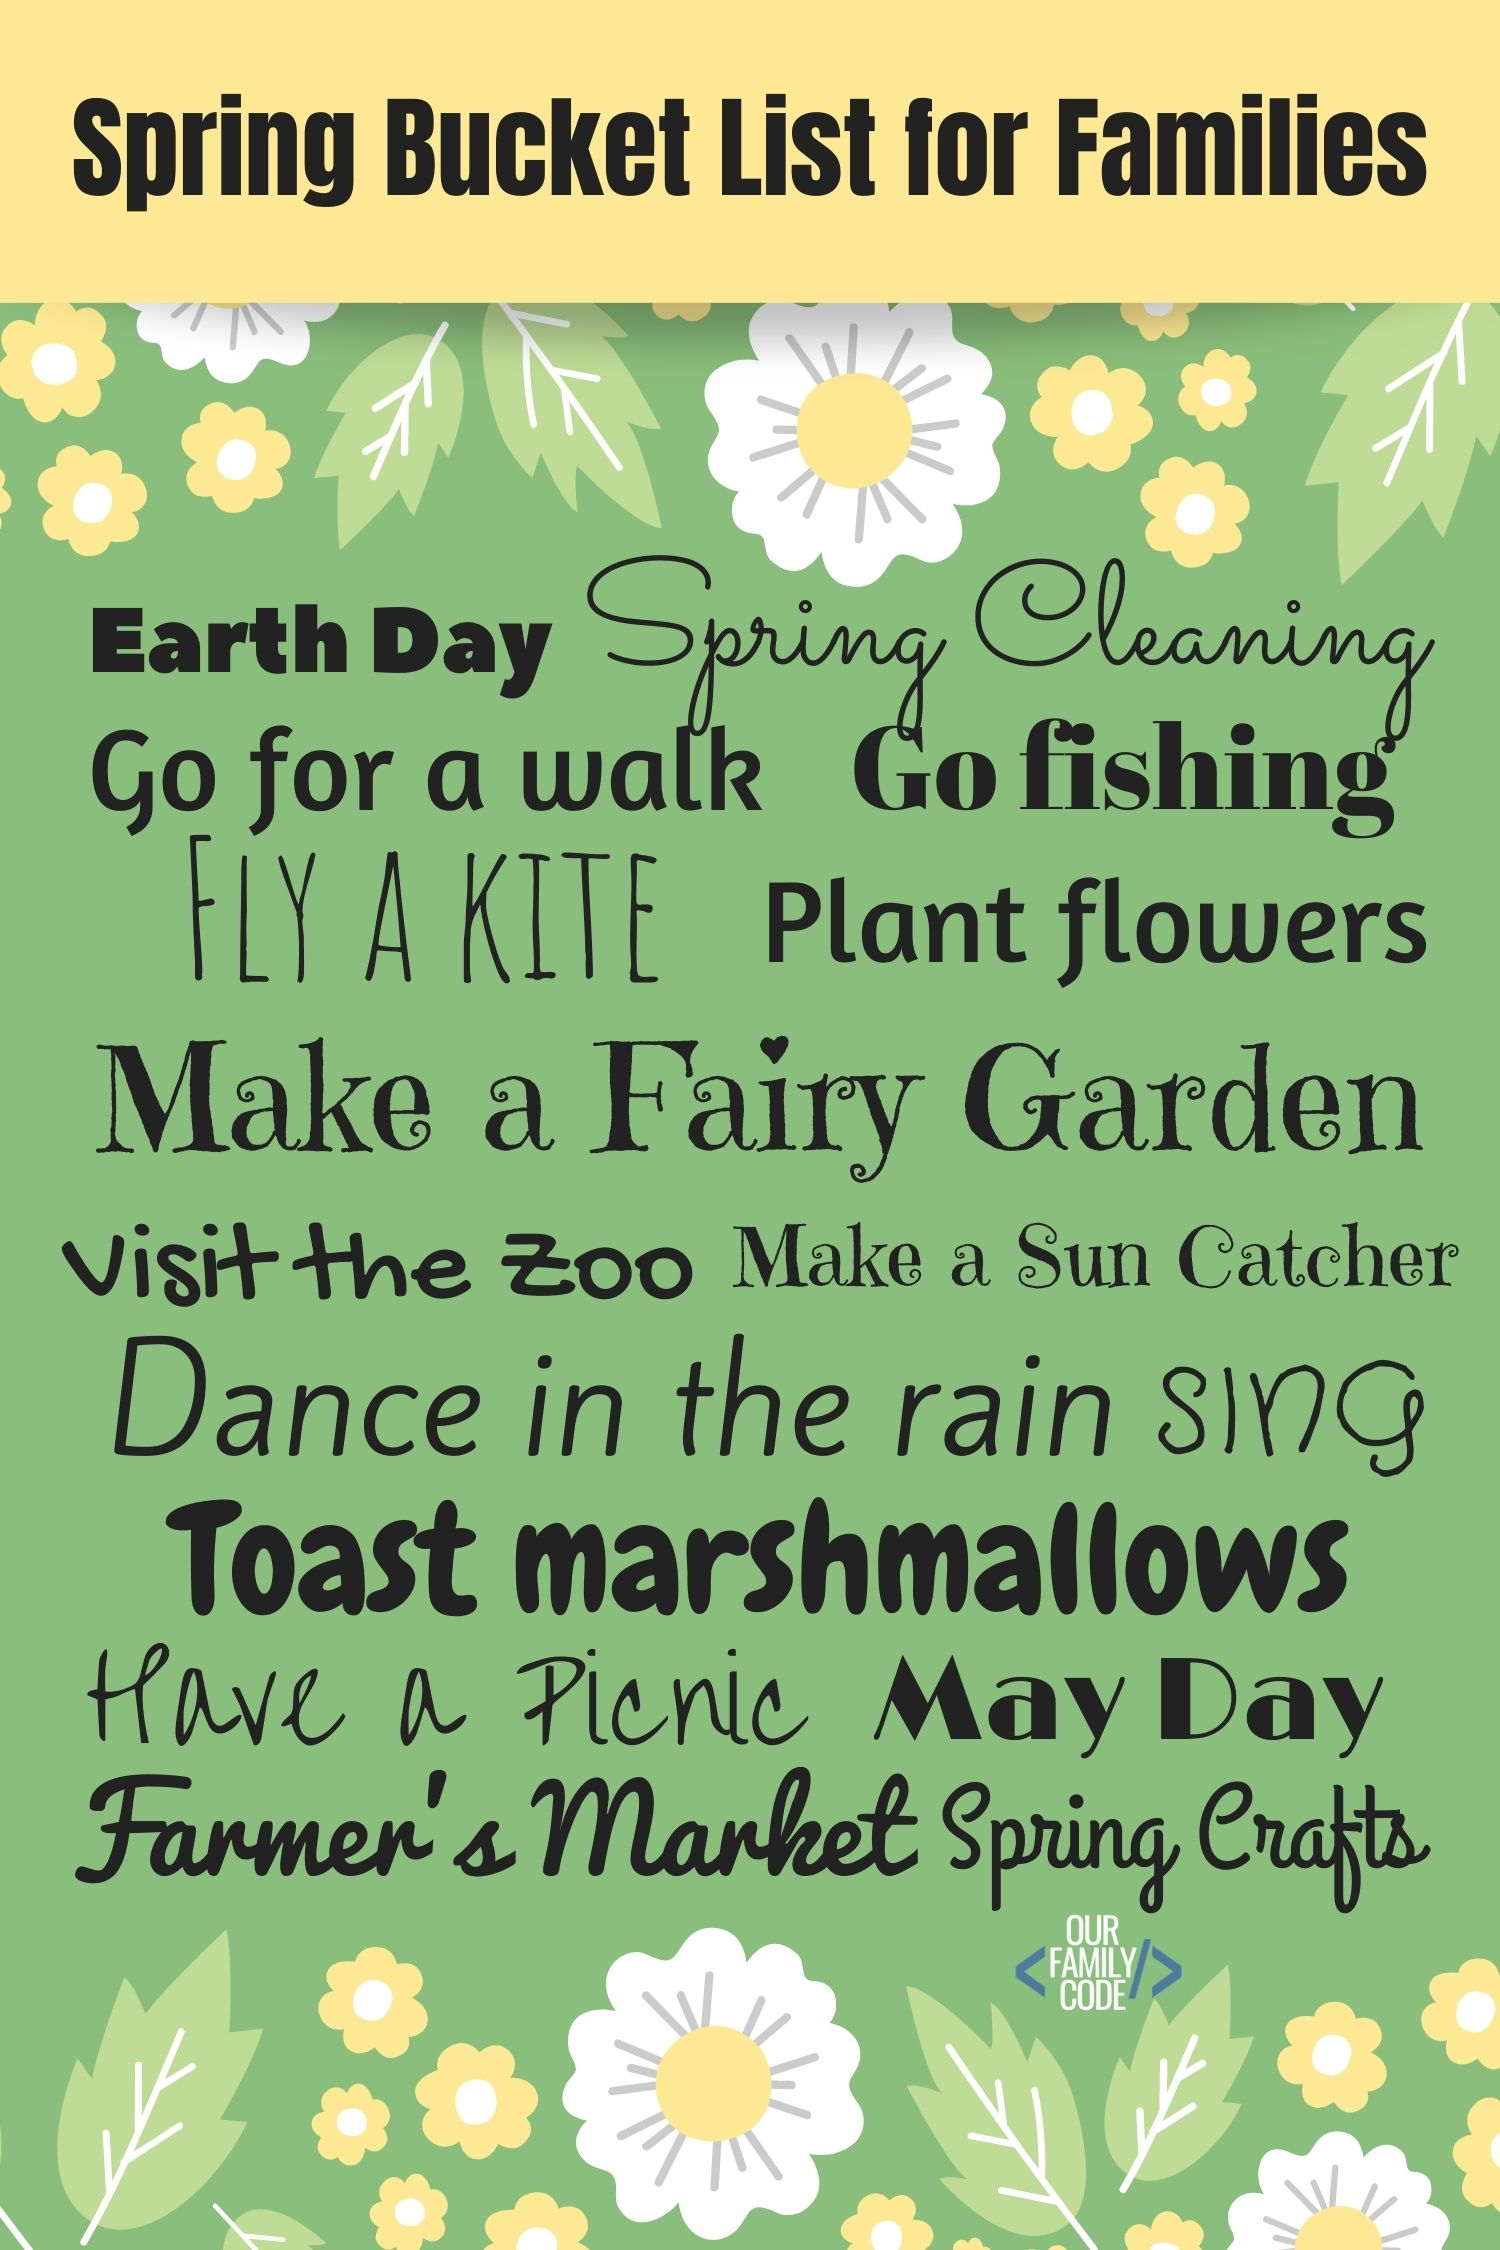 A picture of a Spring Bucket List for Families with a yellow header.